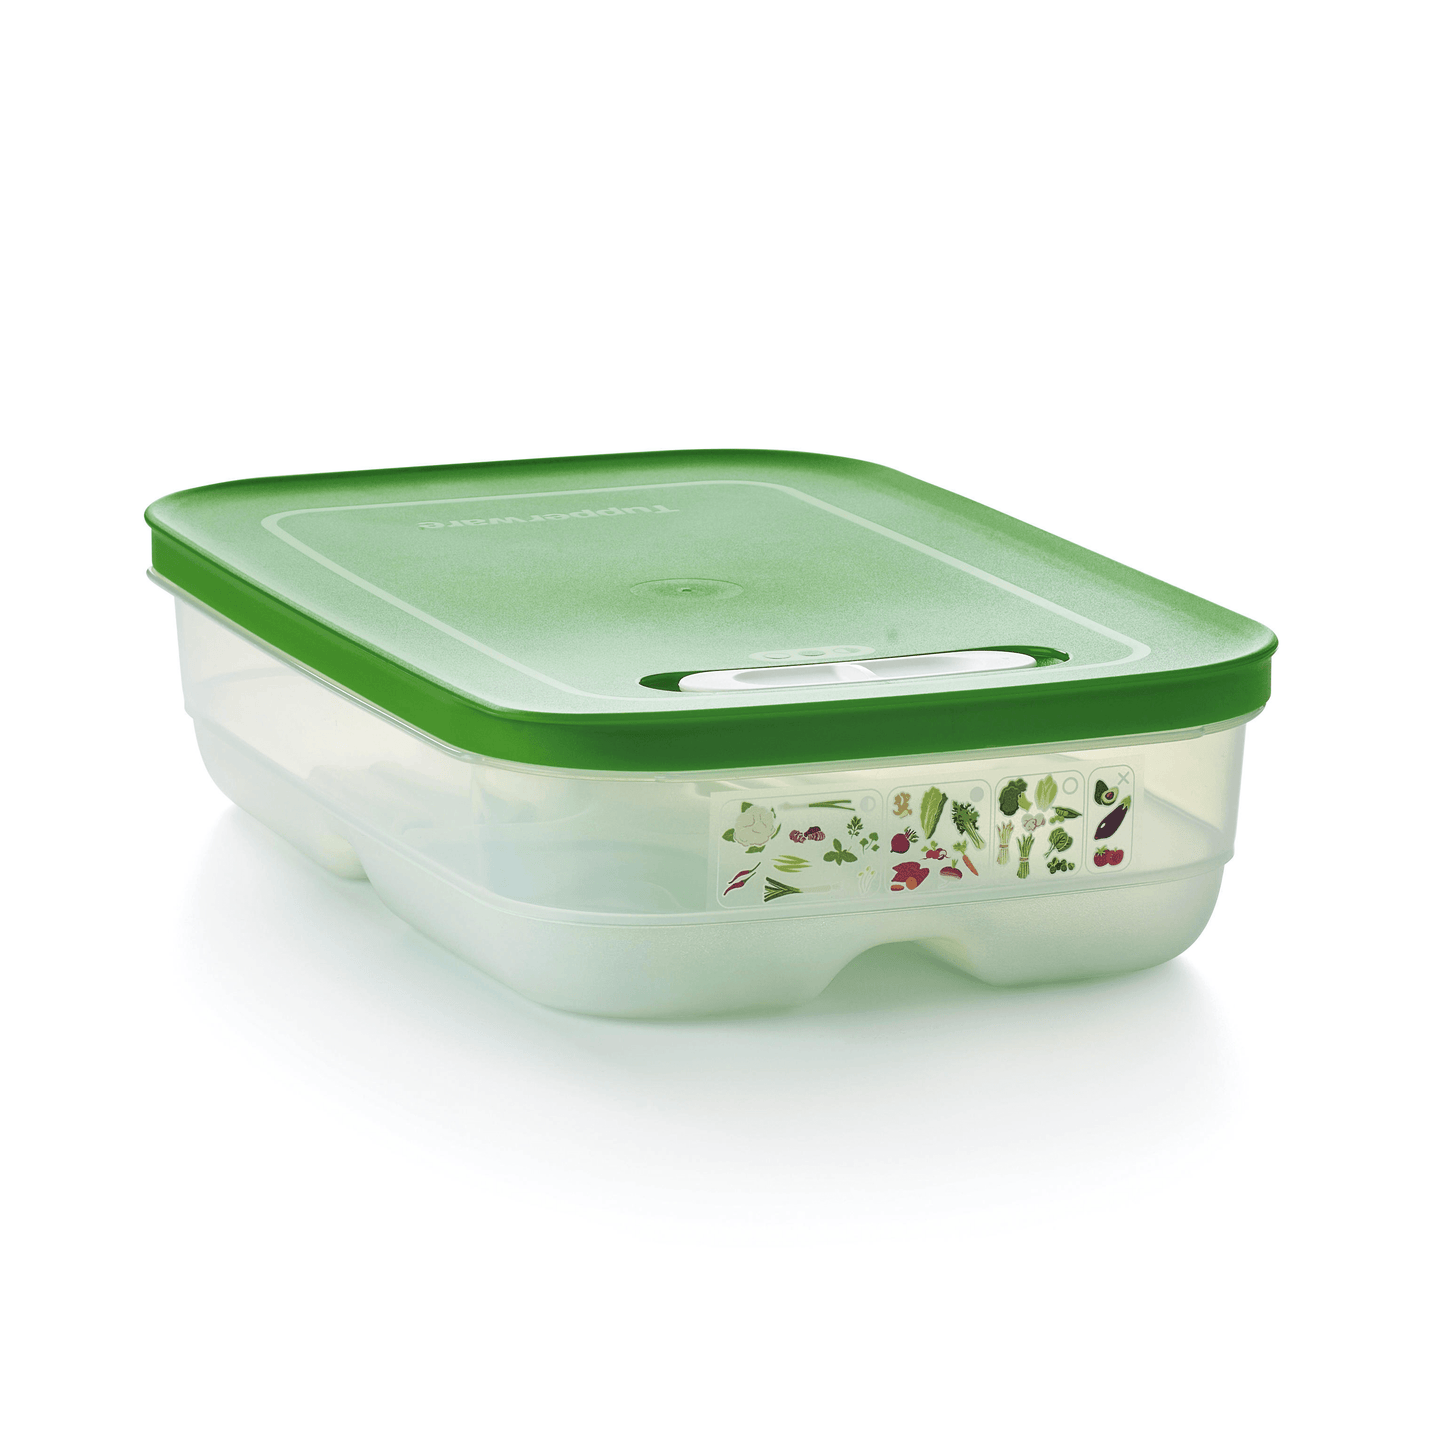 Tupperware - Product Detail Page - Product overview - Products